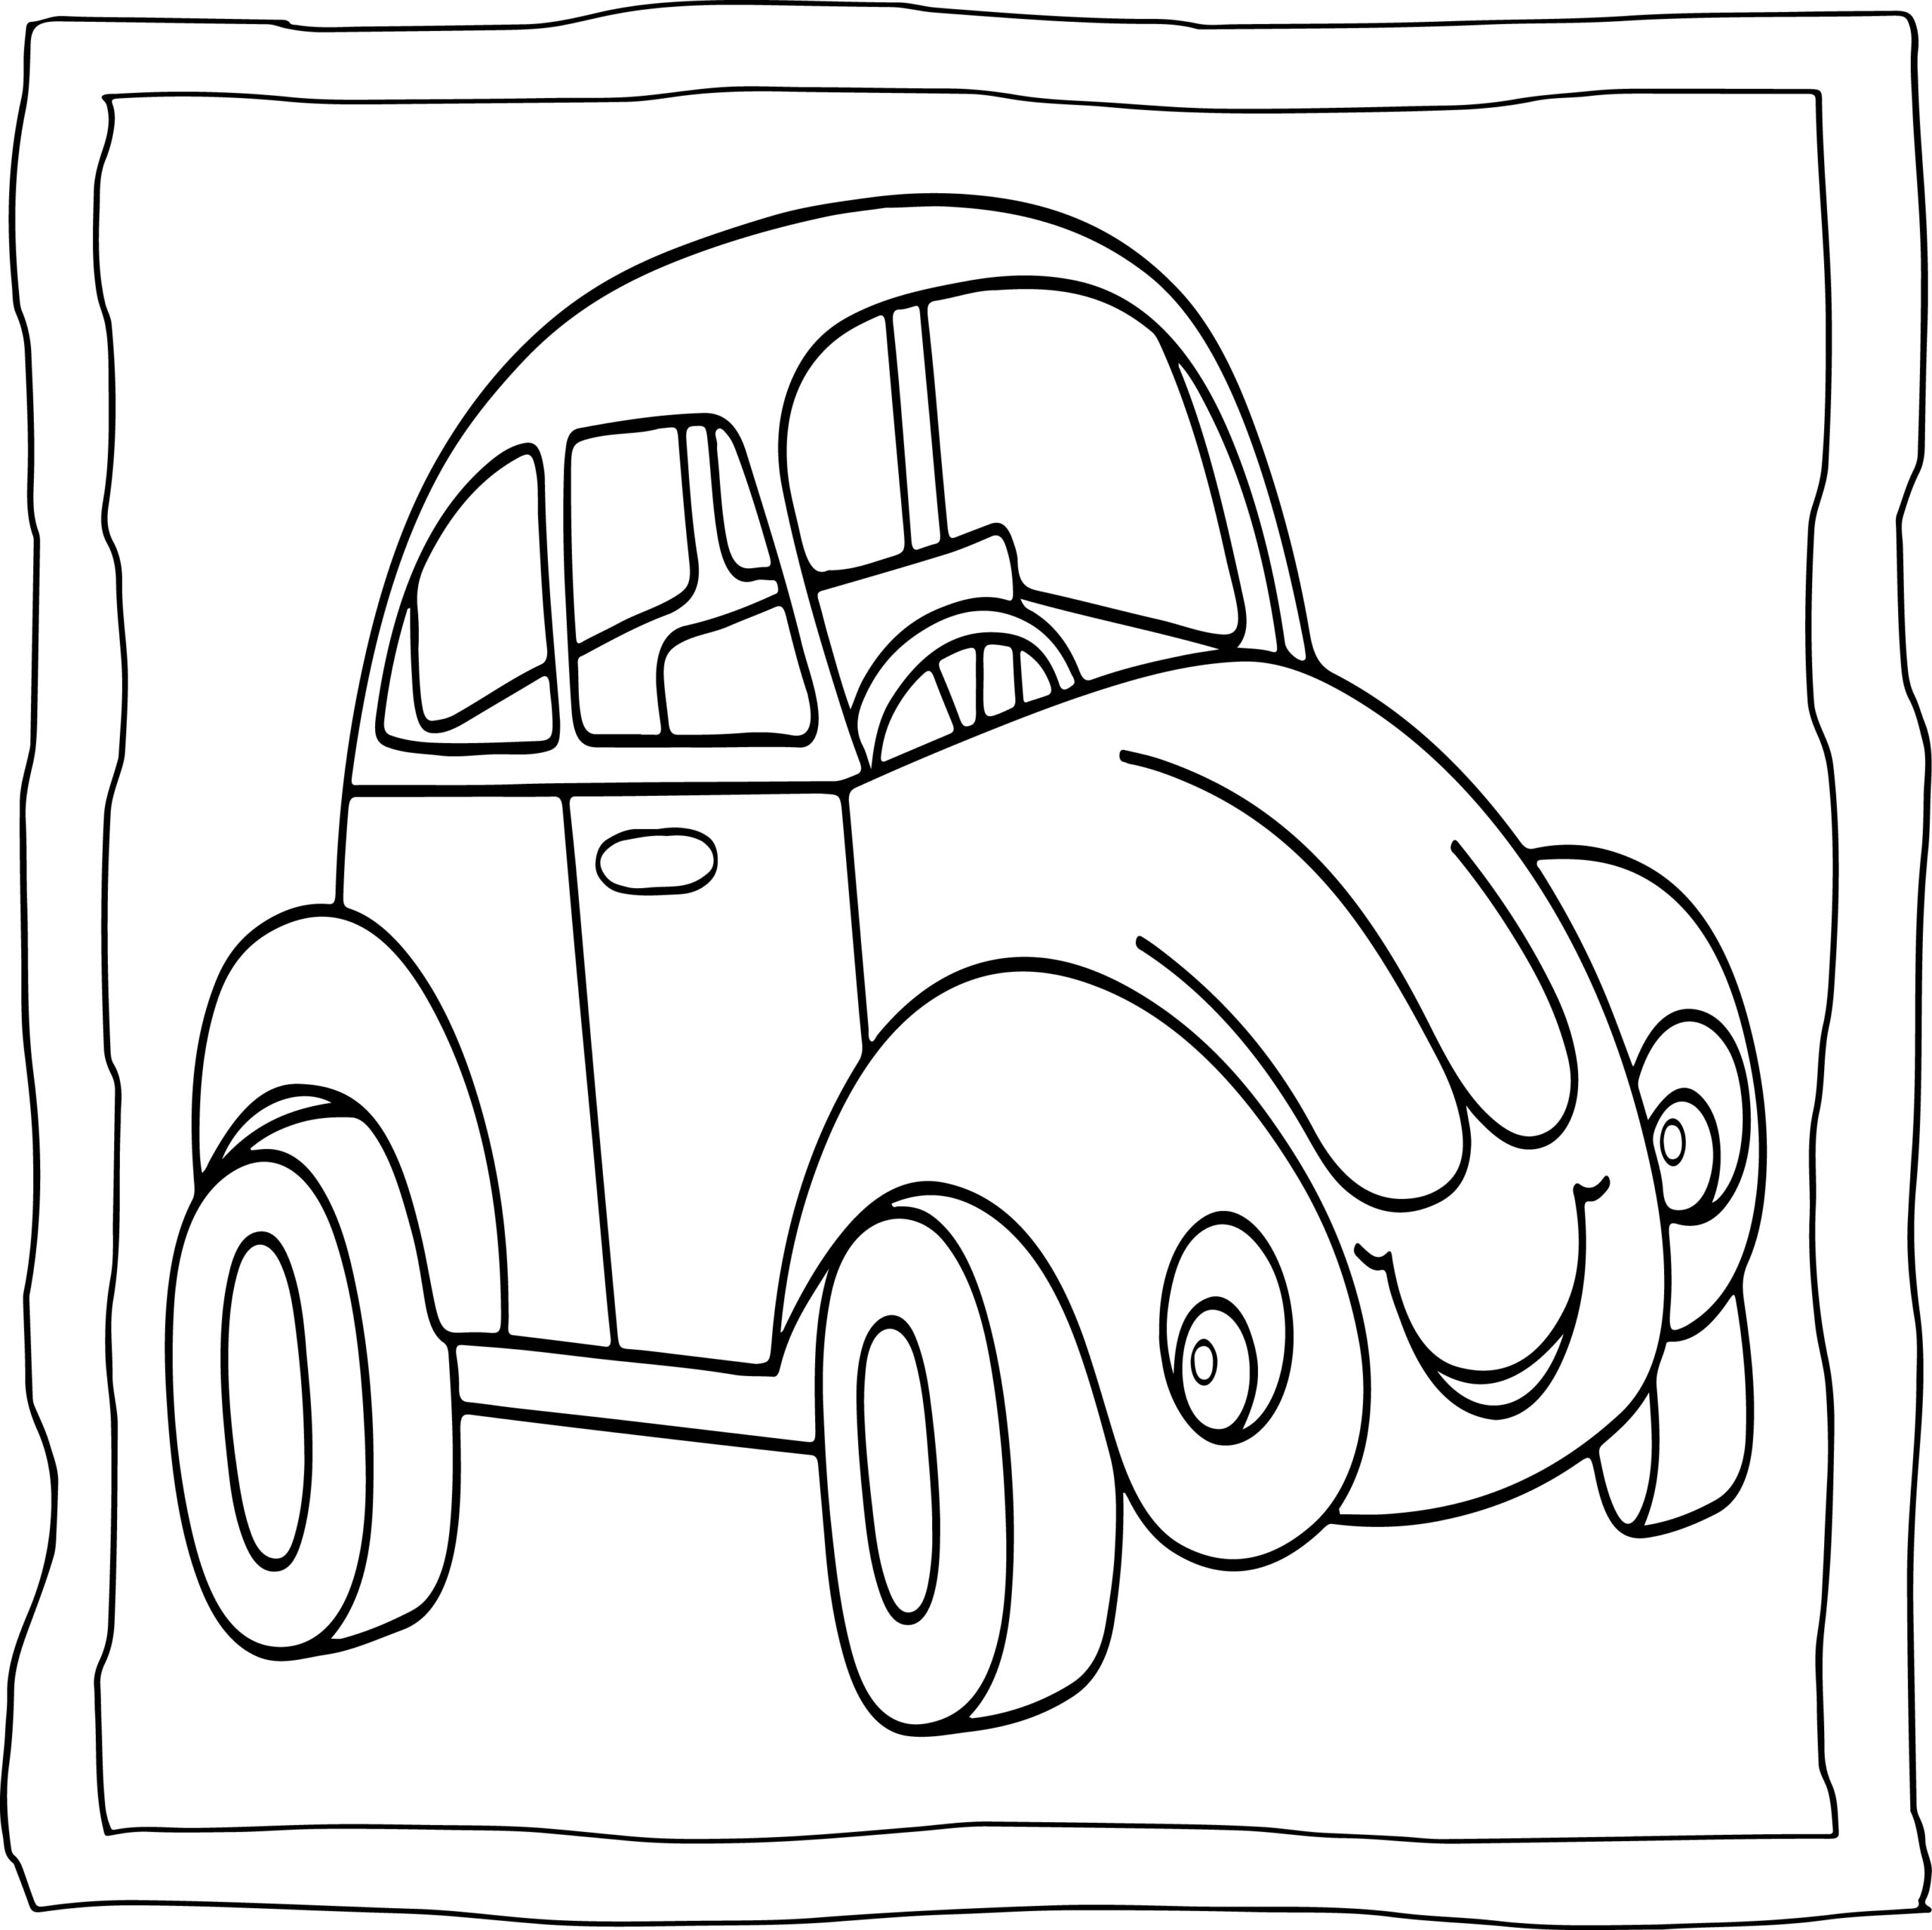 Car coloring book easy and fun cars coloring book for kids made by teachers